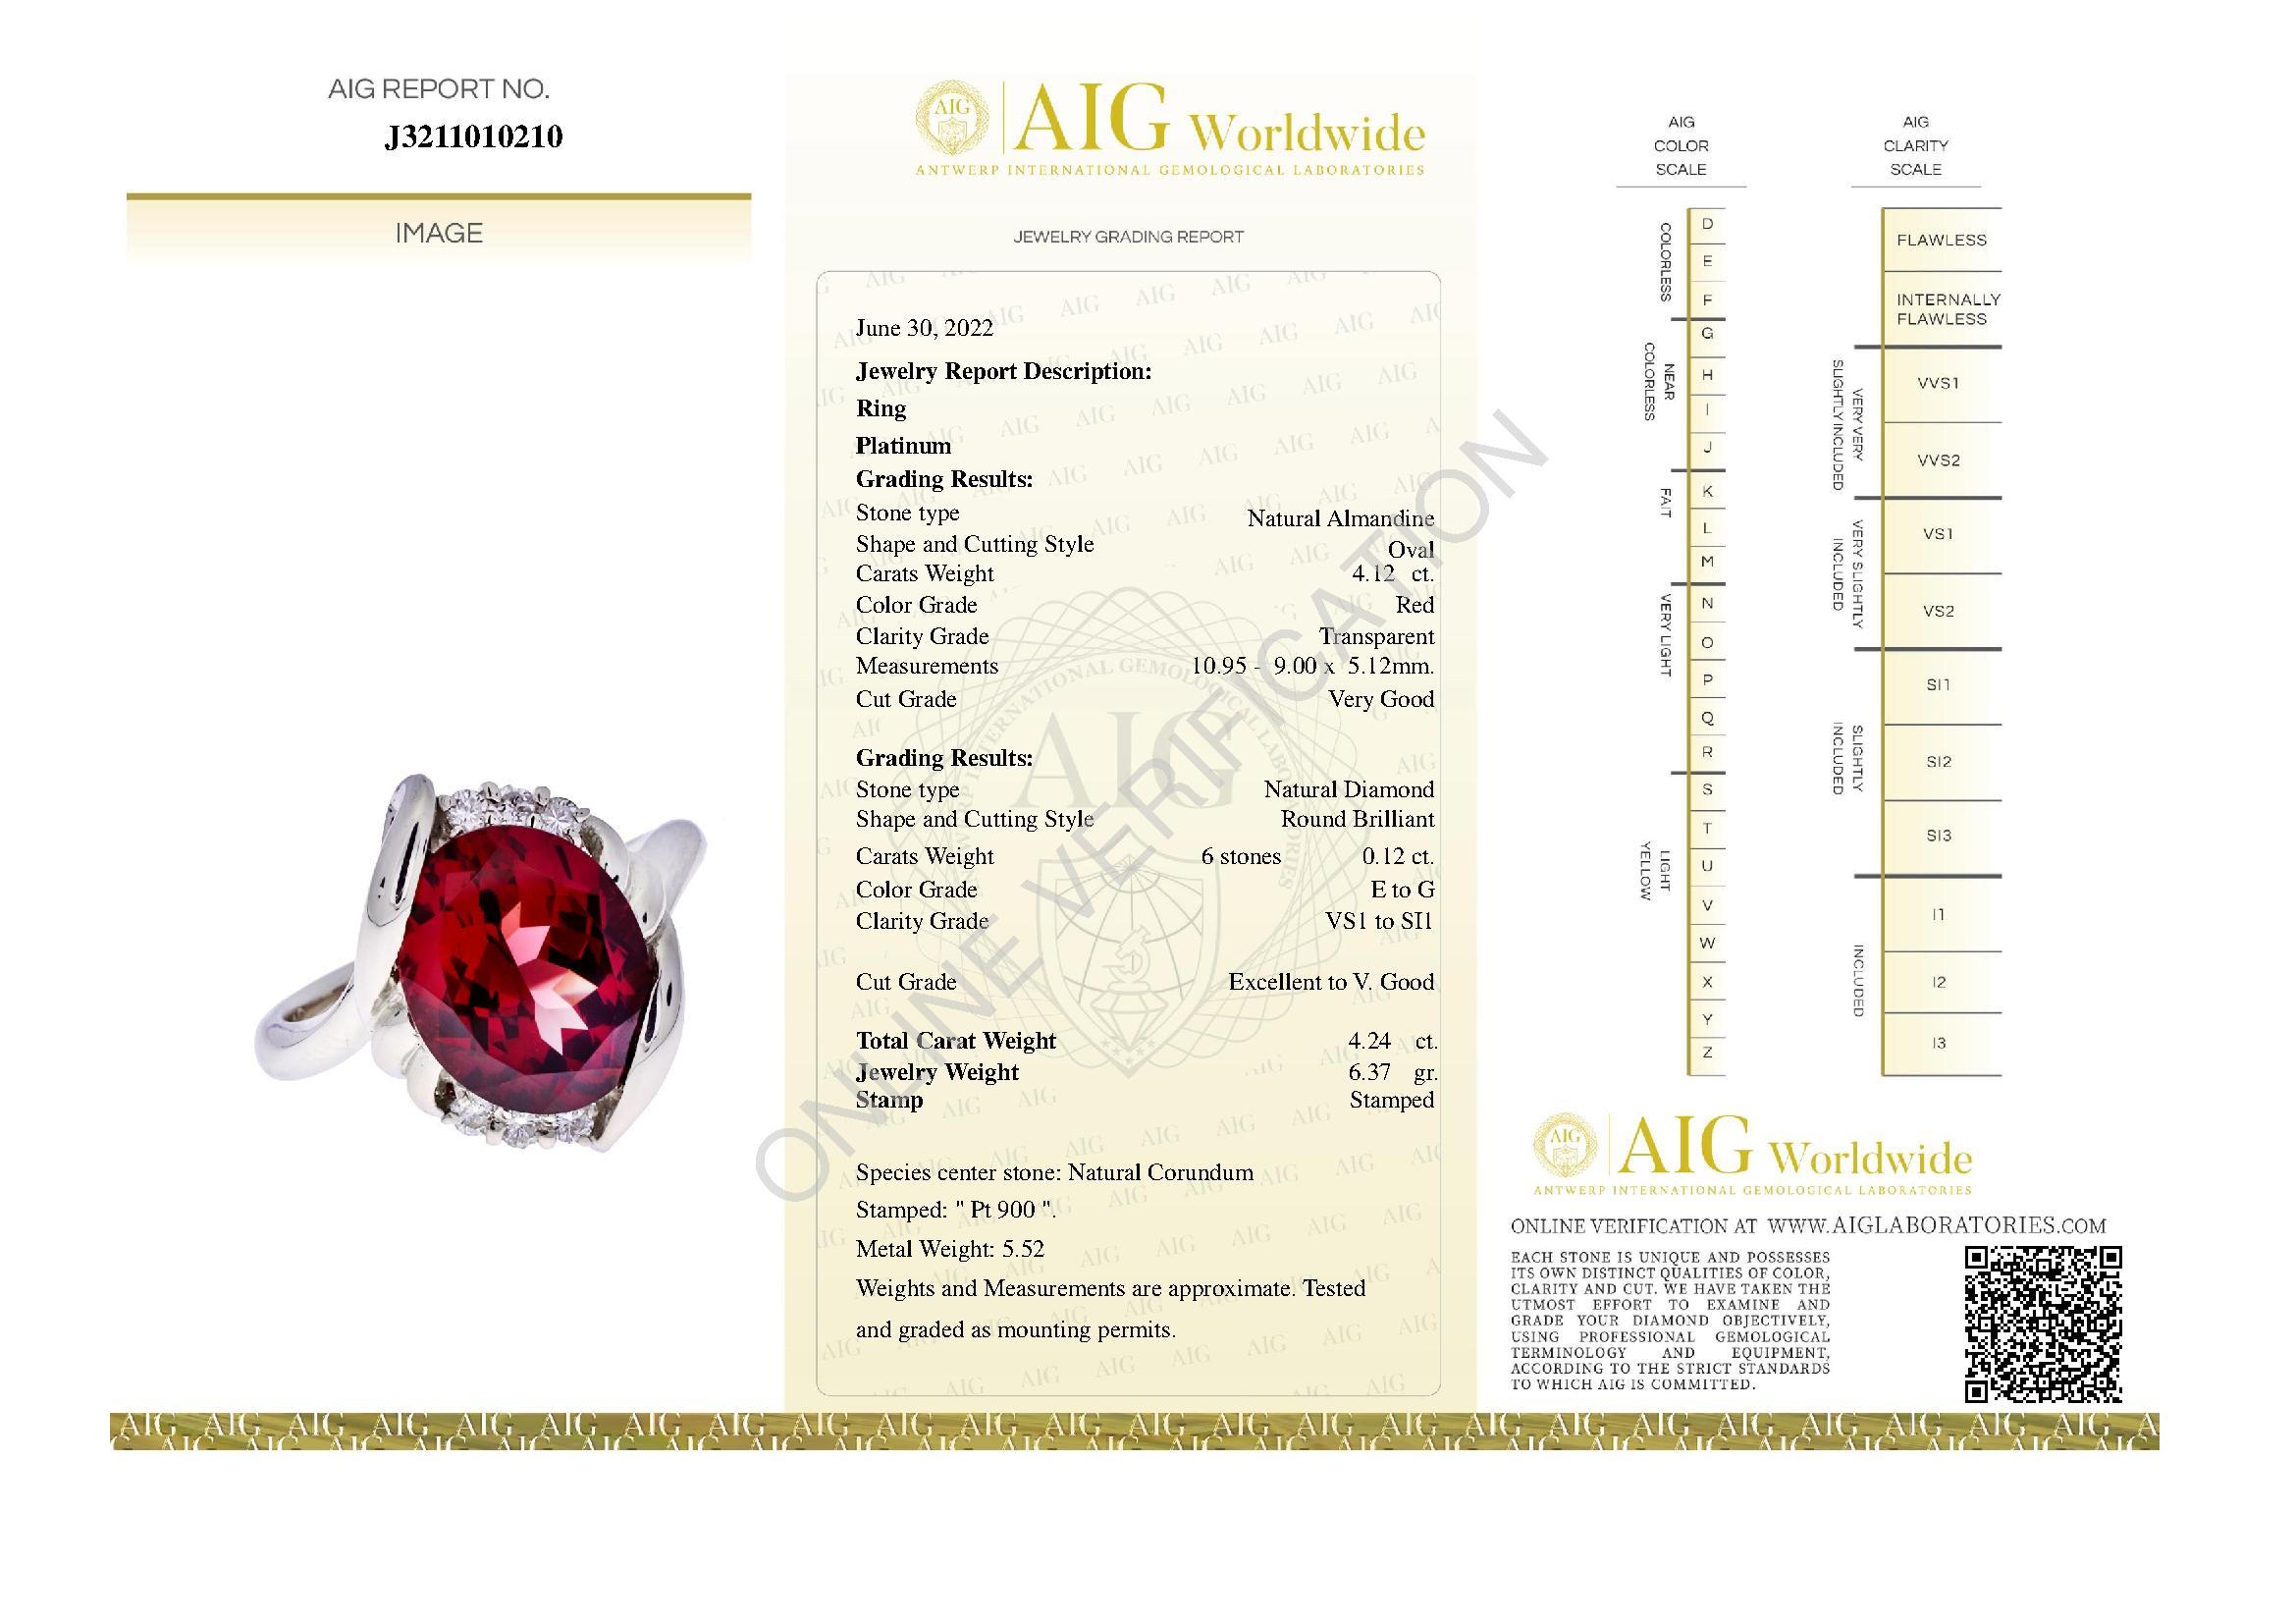 This lot is offered without any reserve price, starting bid $1, highest bid wins.

Platinum Ring set with 4.12 ct Natural Almandine Garnet, accented by 0.12 ct Natural White Diamonds.

Color Grading: Red
Clarity Grading: Transparent
Total Carat